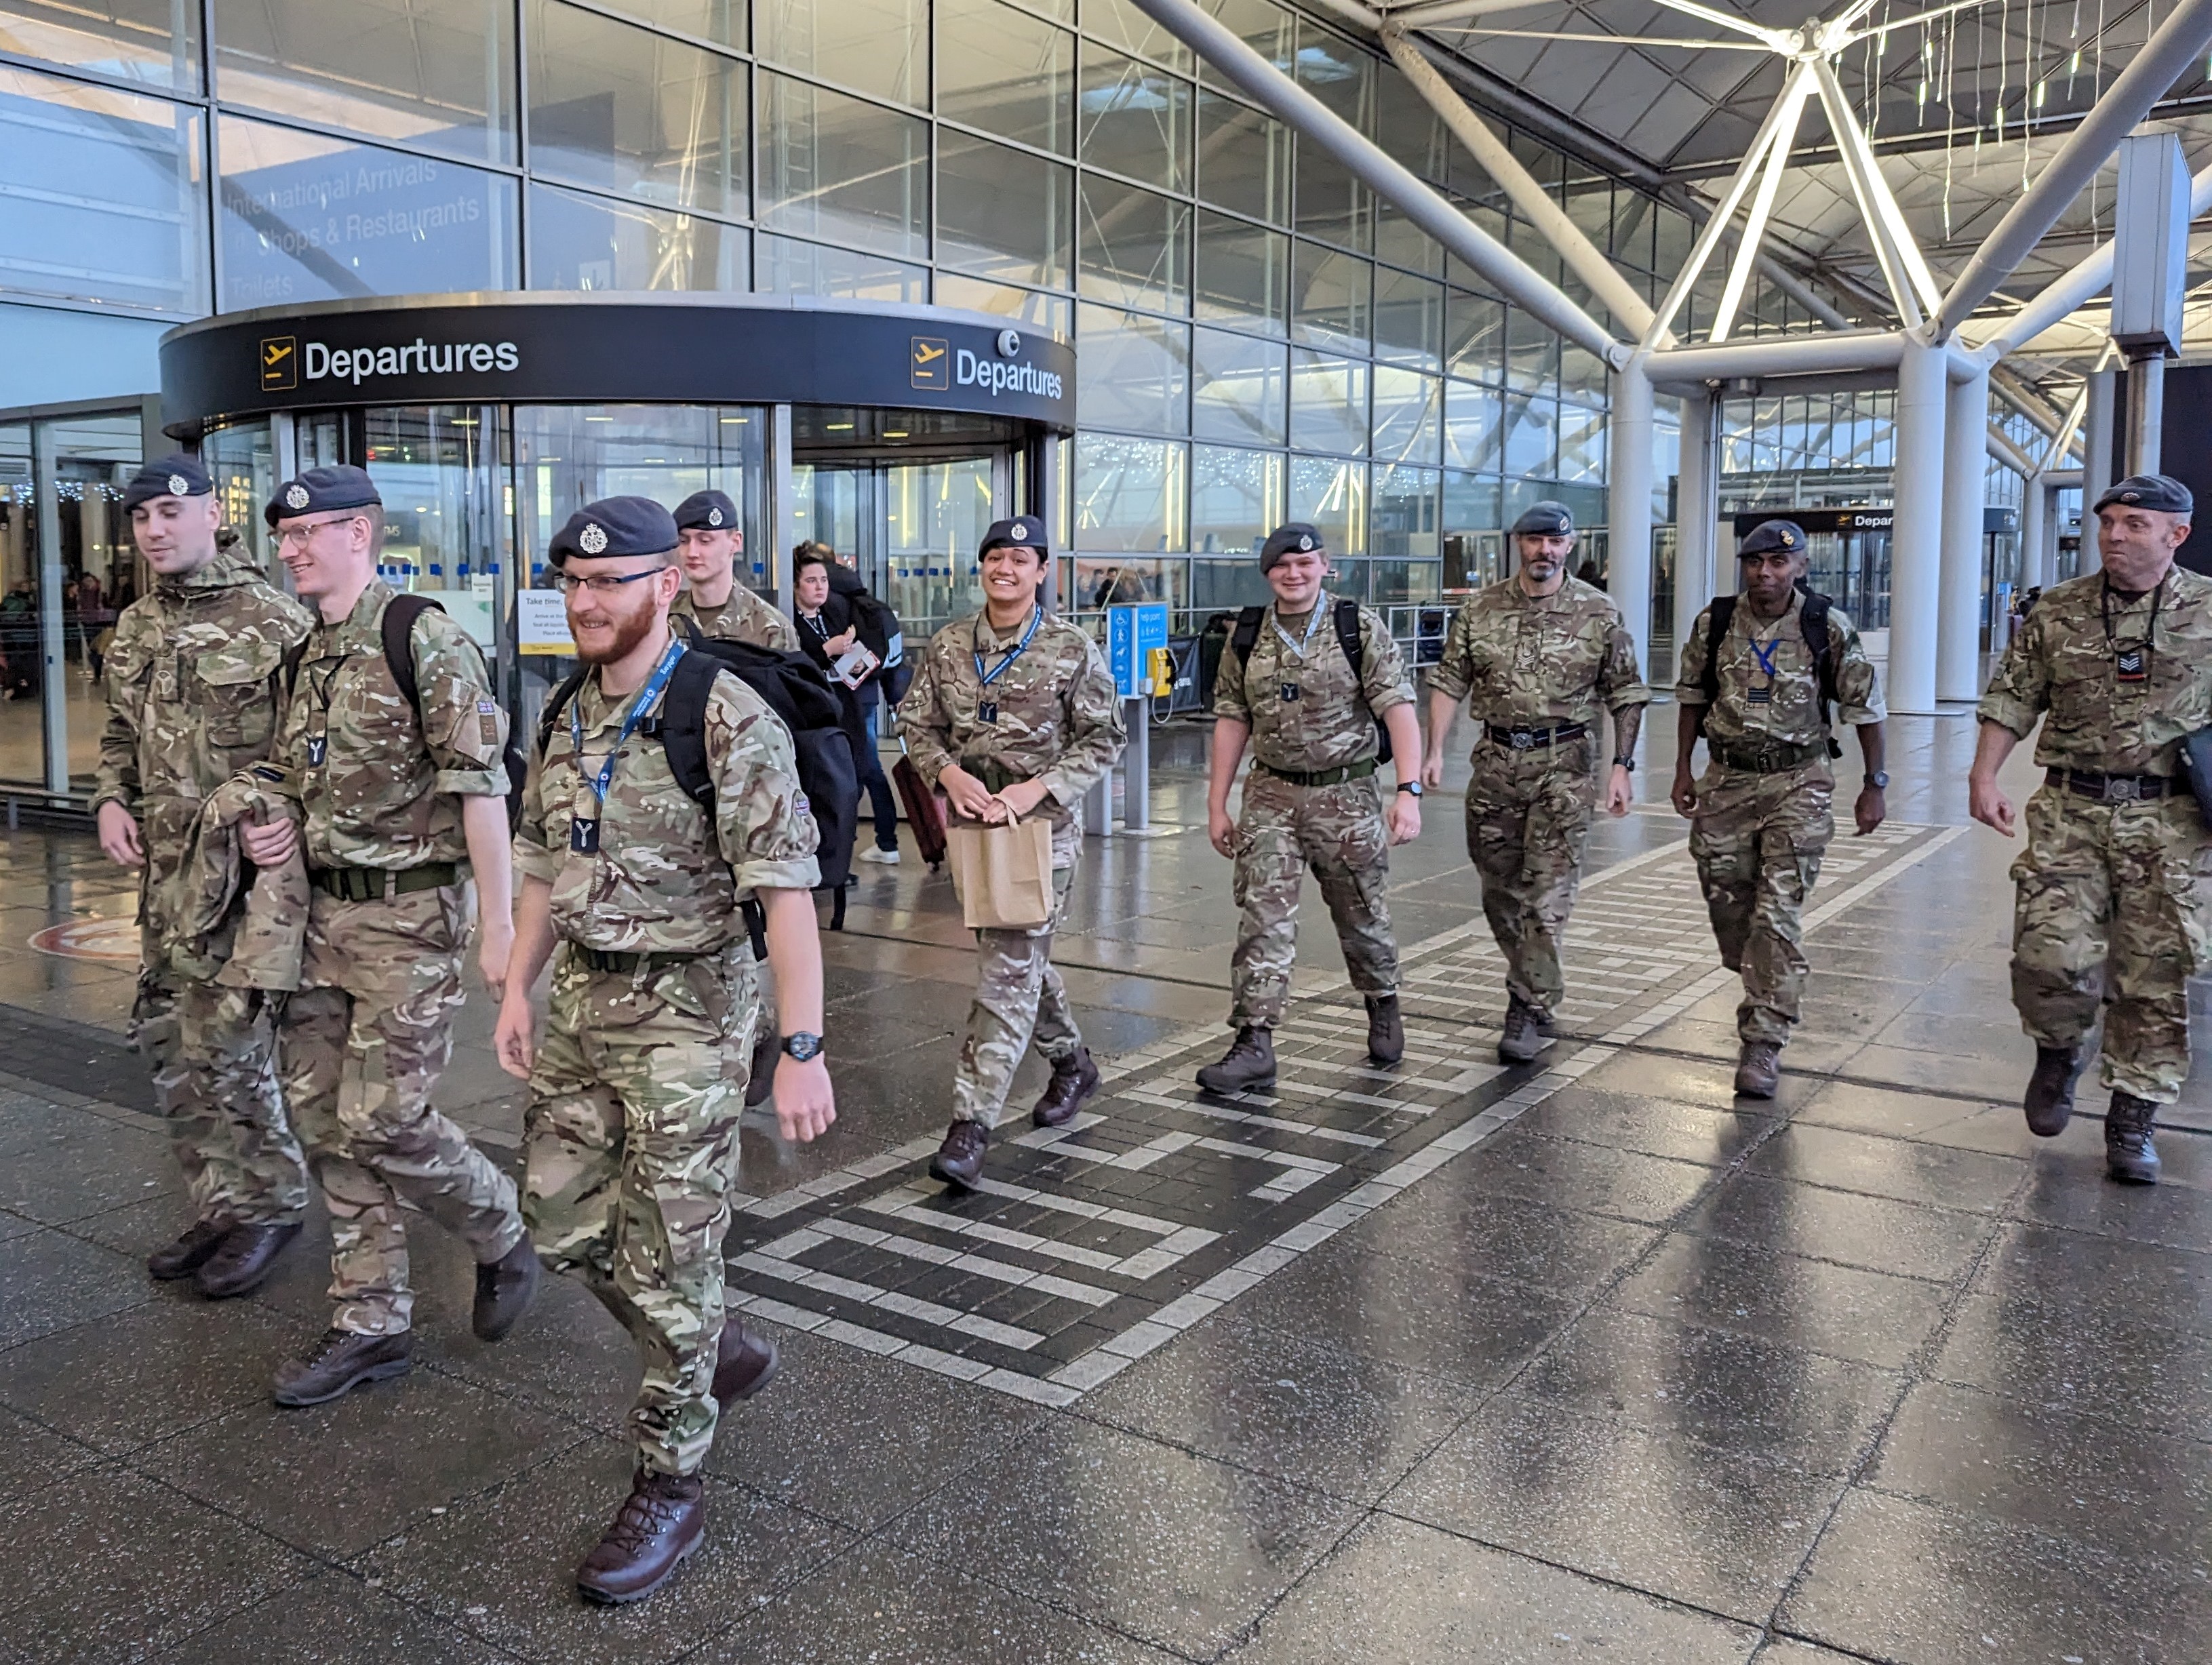 Image shows RAF Aviators walking past departures at Stansted Airport.